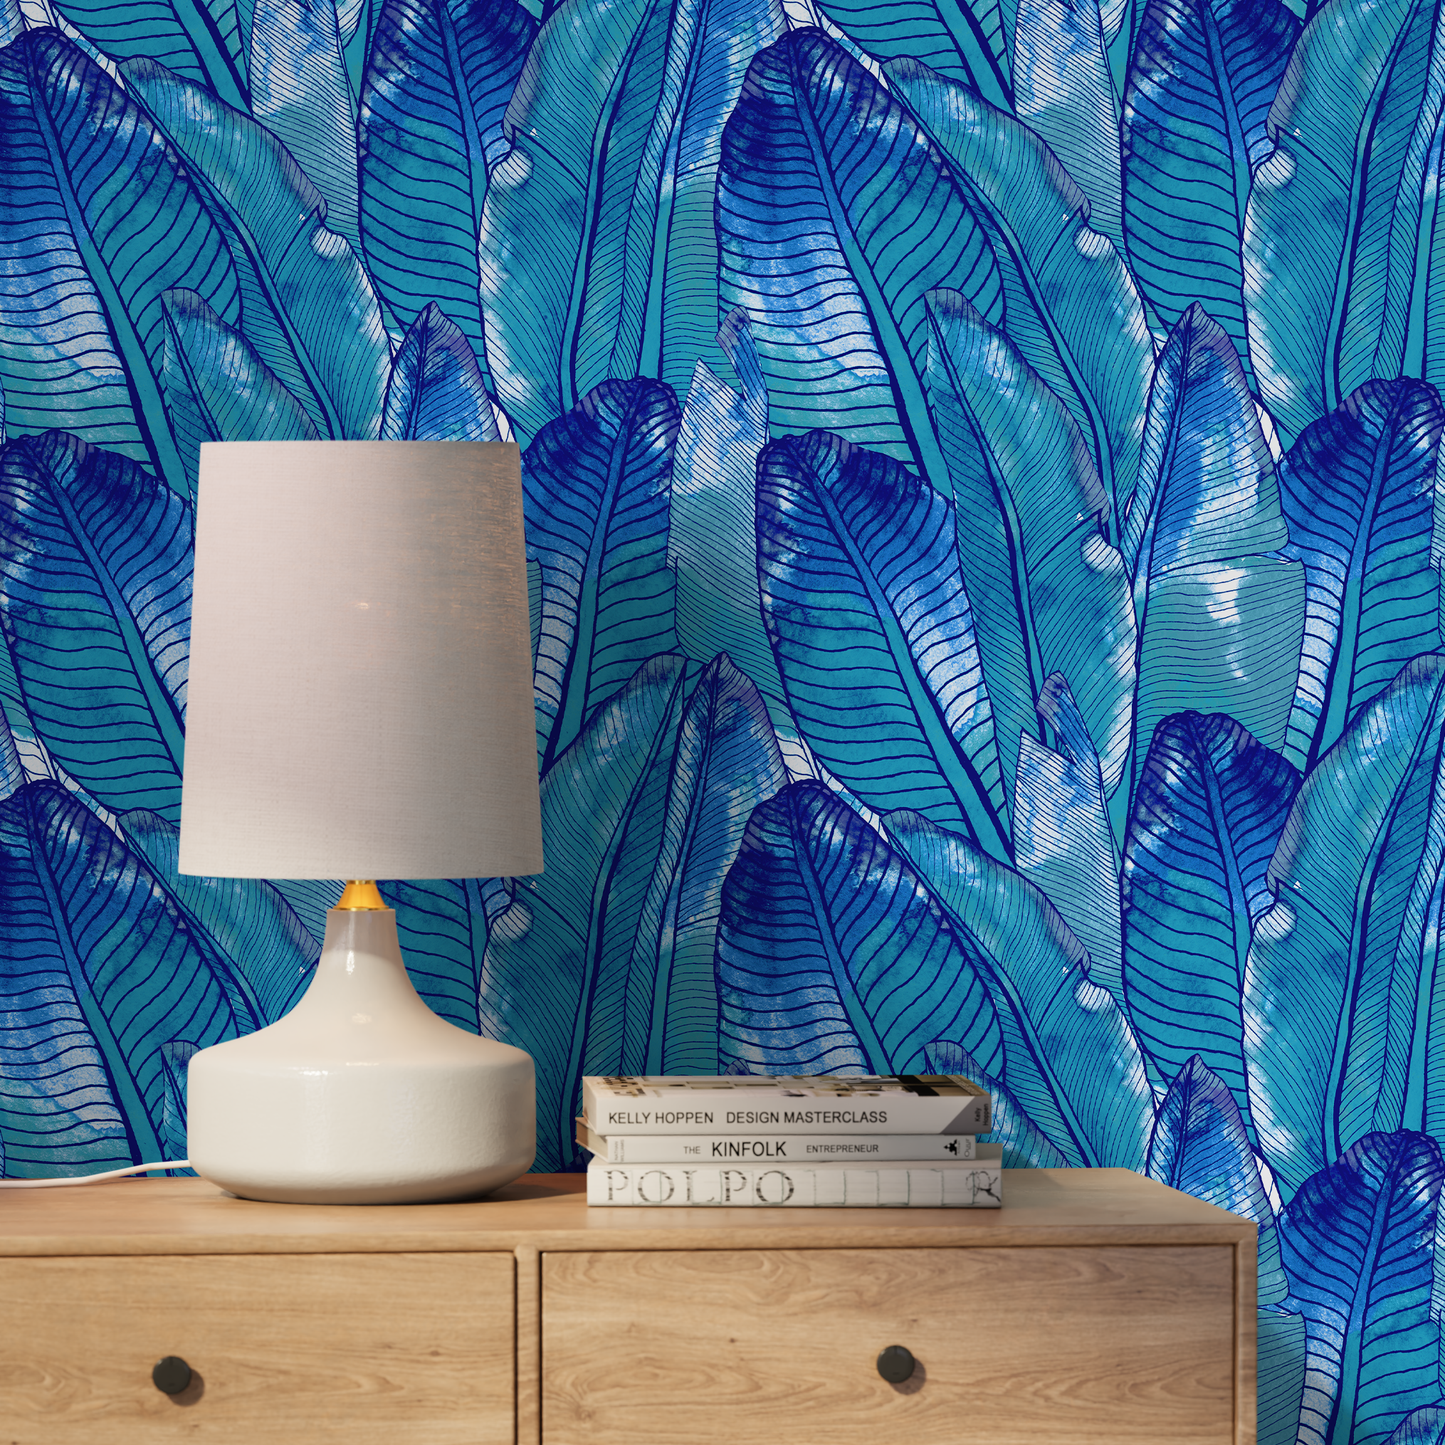 Tropical Wallpaper Blue Banana Leaf Wallpaper Peel and Stick and Traditional Wallpaper - A513